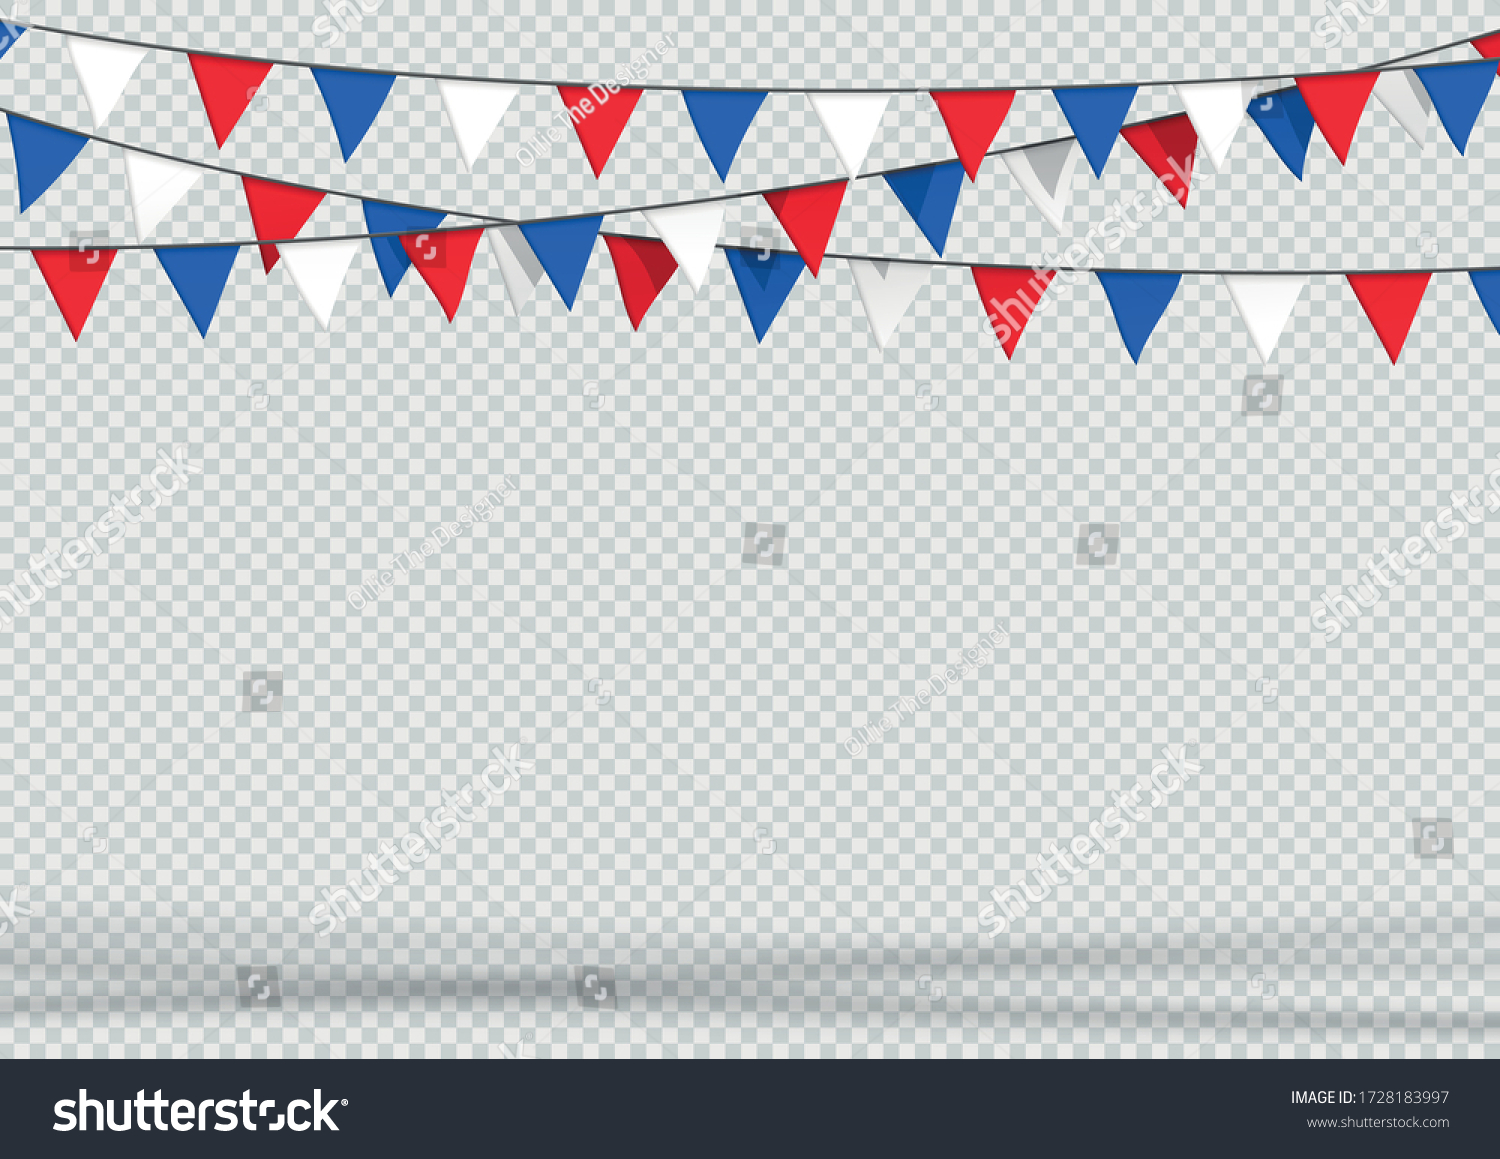 SVG of Bunting Hanging Banner Red White Blue Flag Triangles Background svg